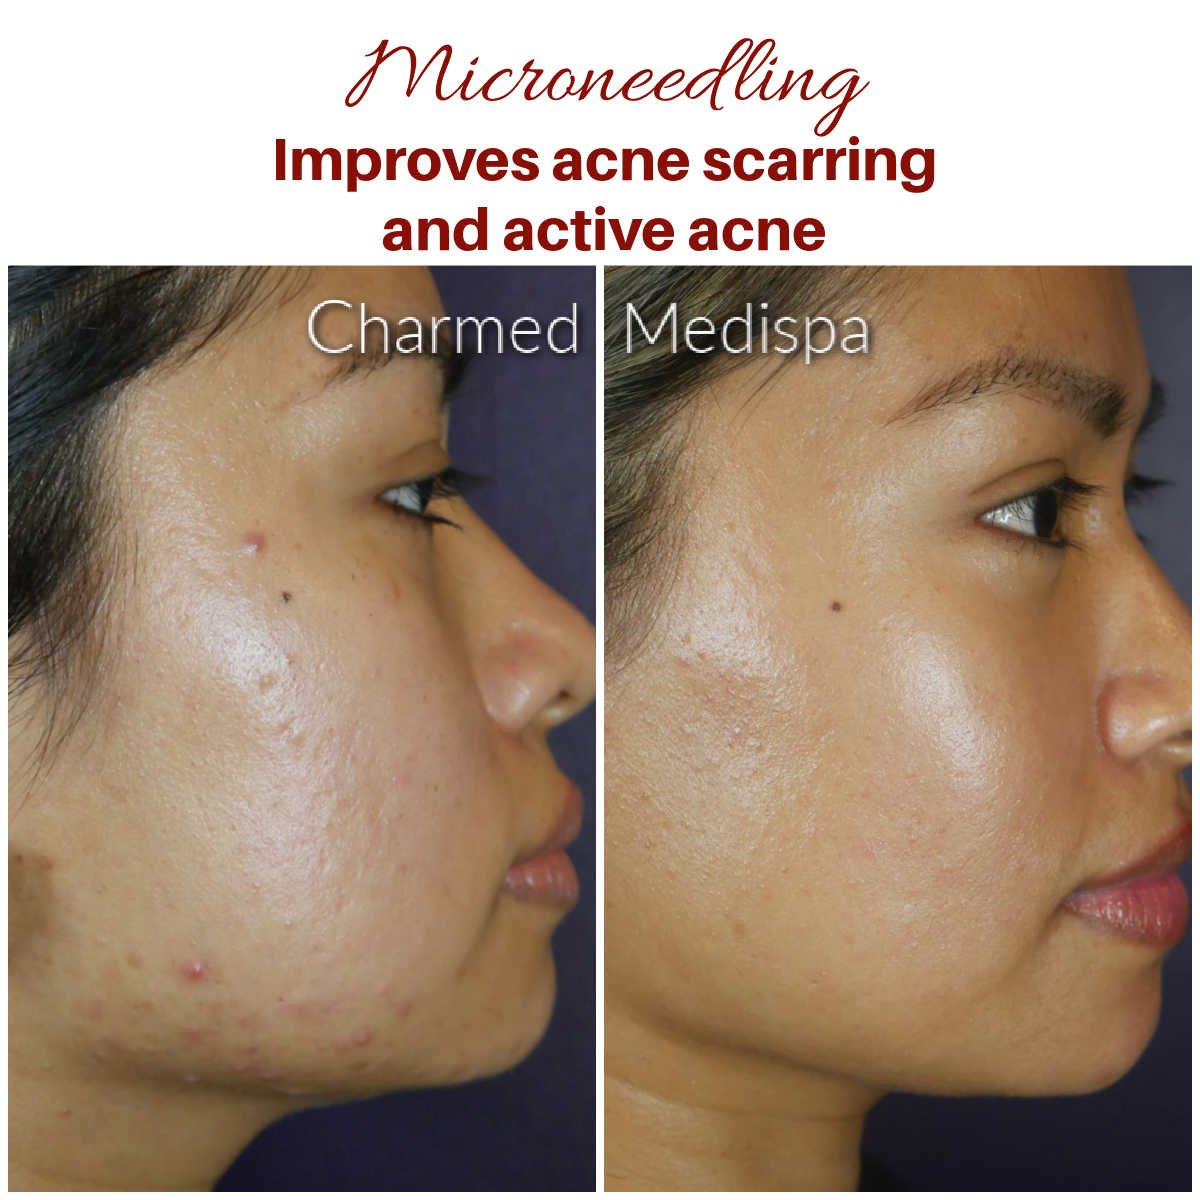 How to Treat Breakouts After Microneedling?